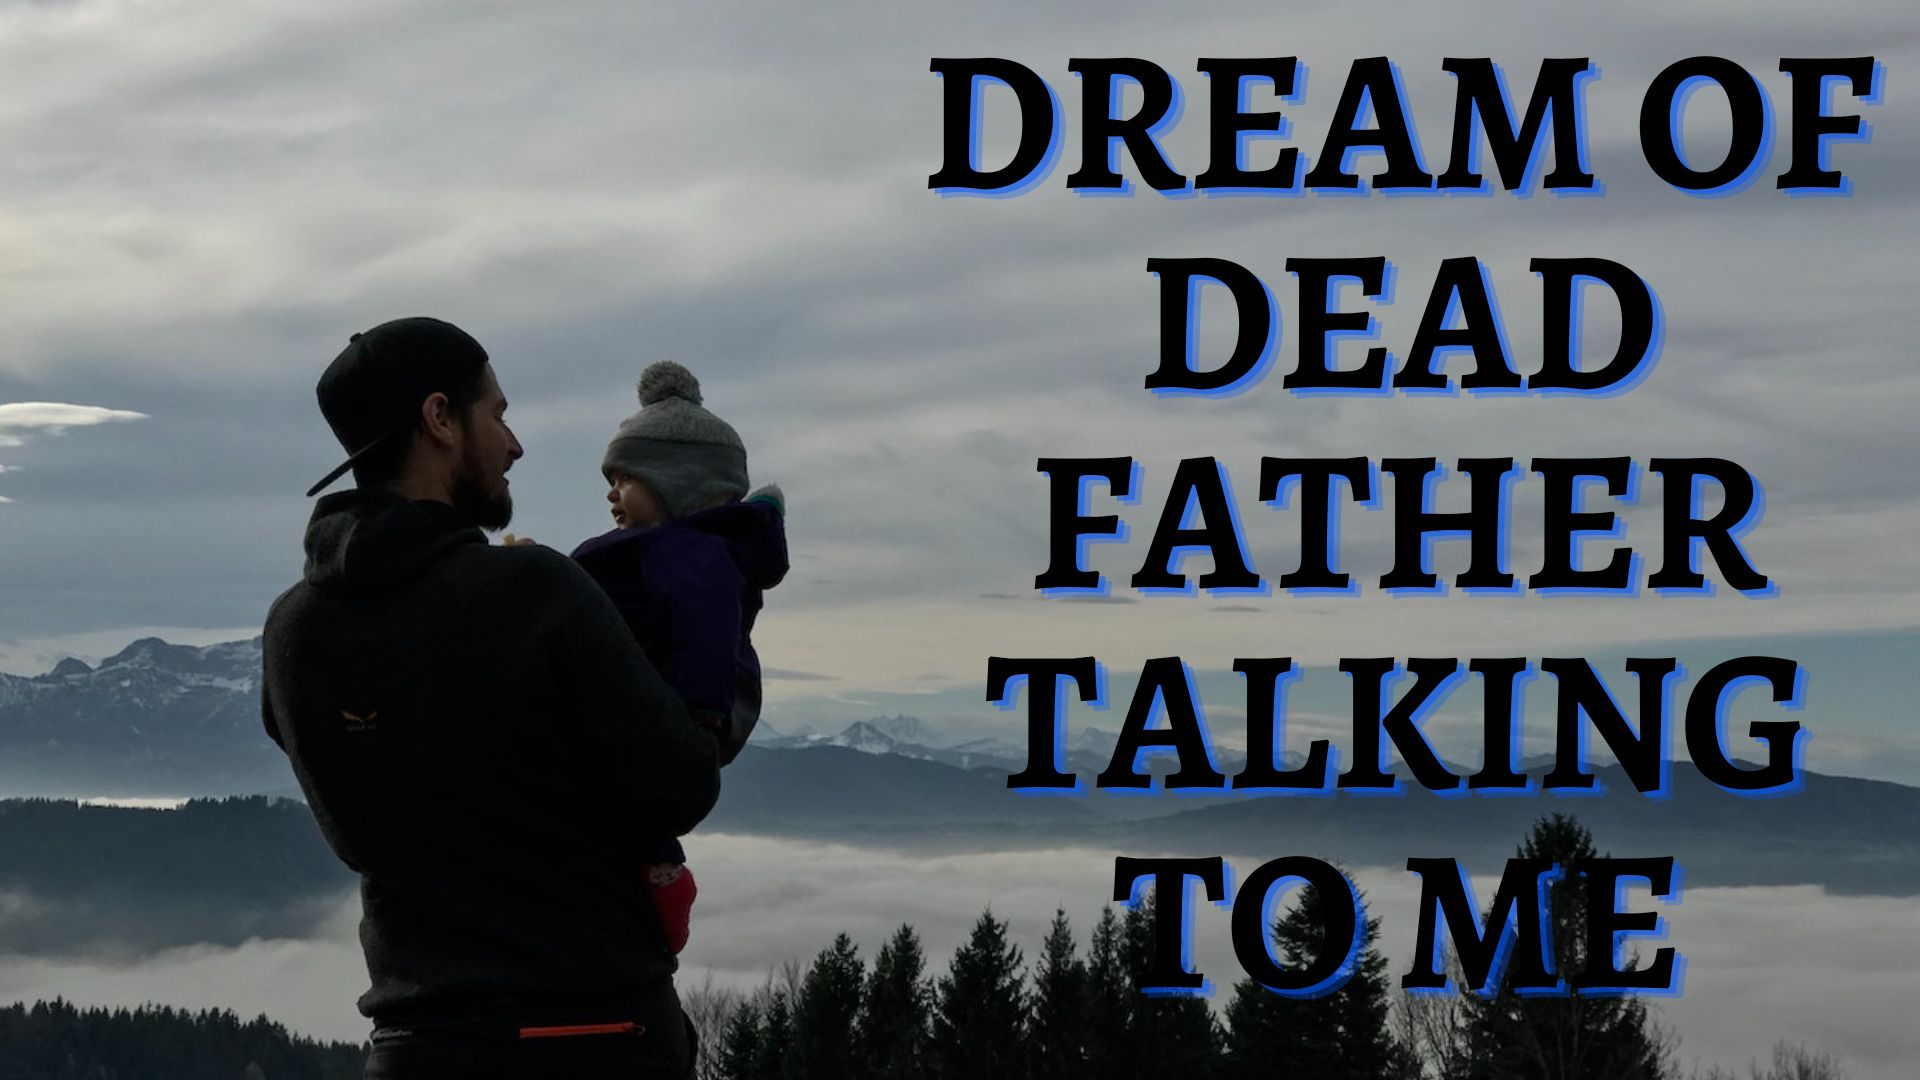 Dream Of Dead Father Talking To Me - A Sign Of Bad Luck